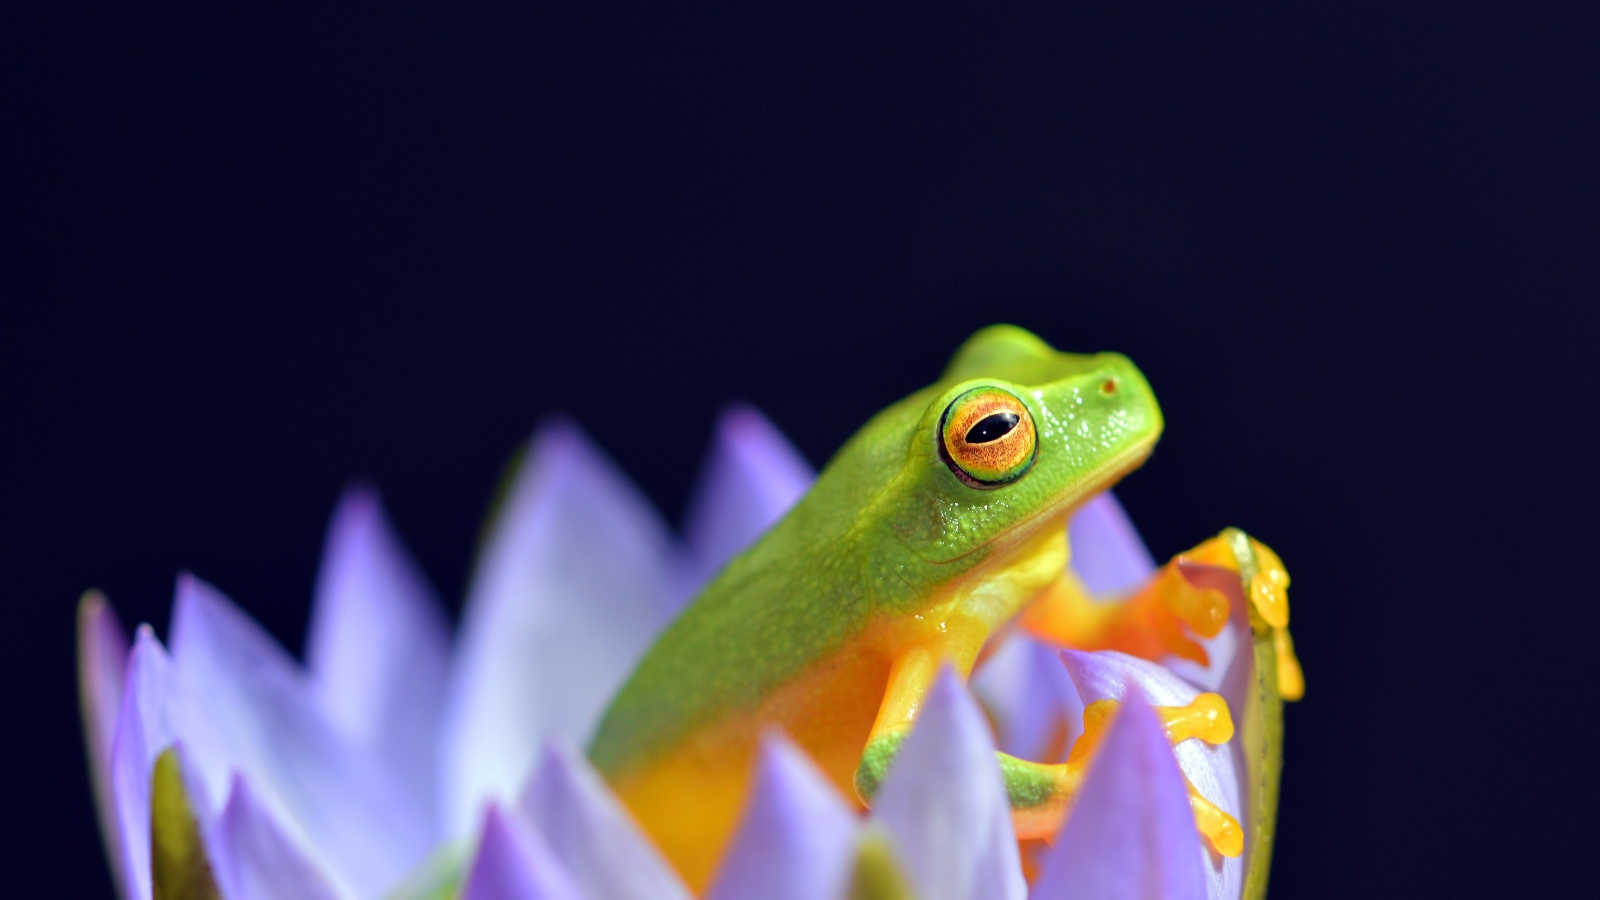 A green frog sits in a lotus flower on a blue background